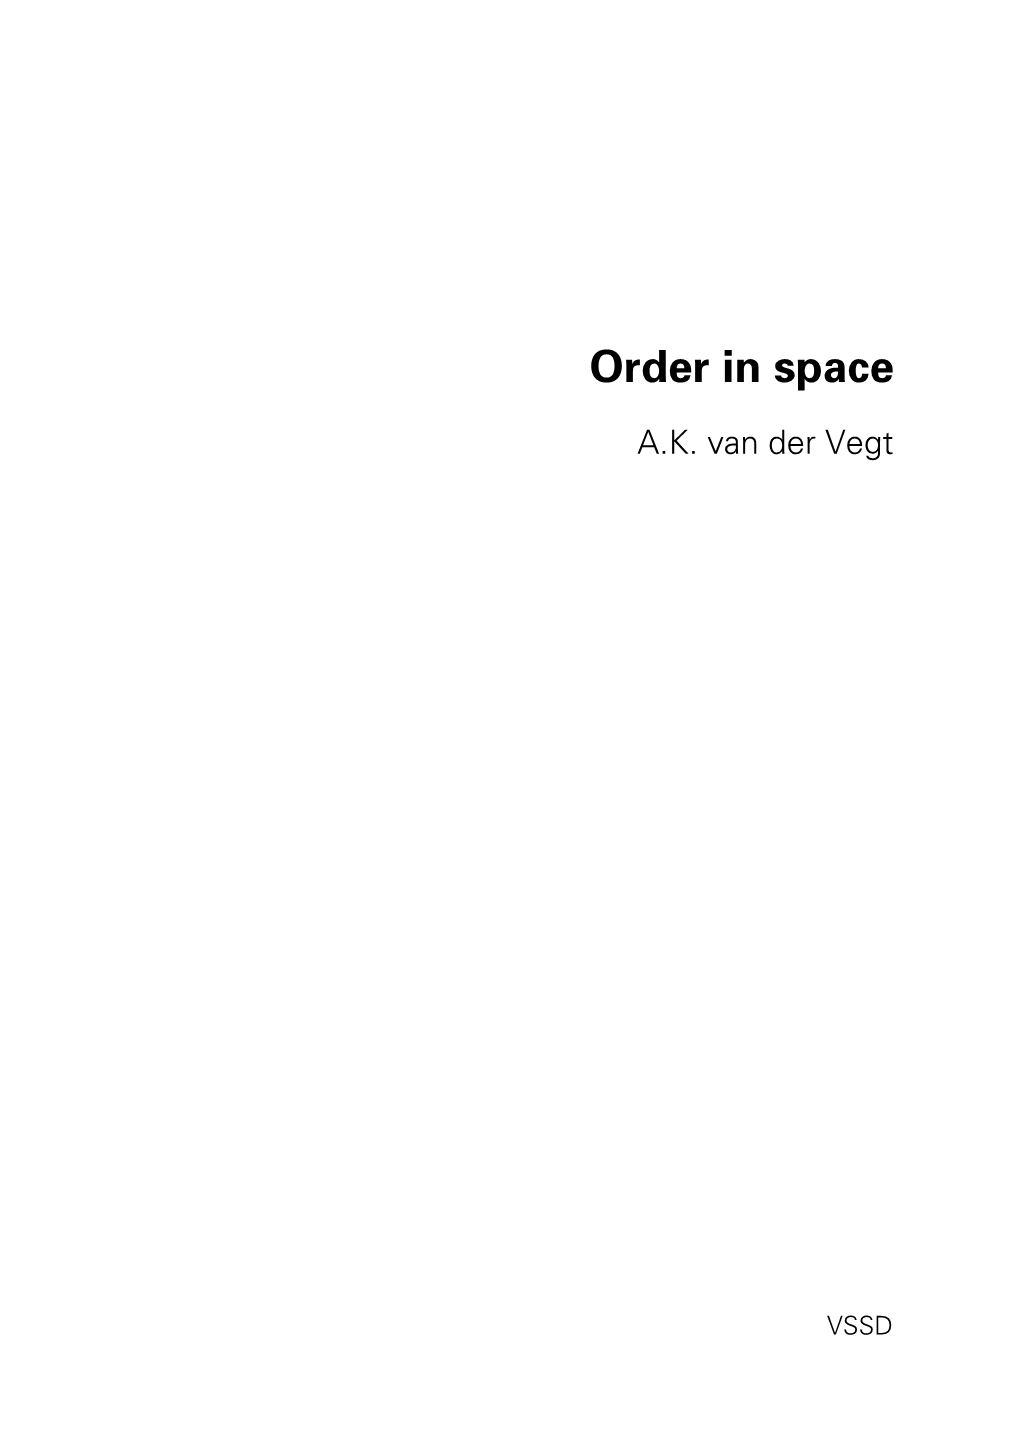 Order in Space